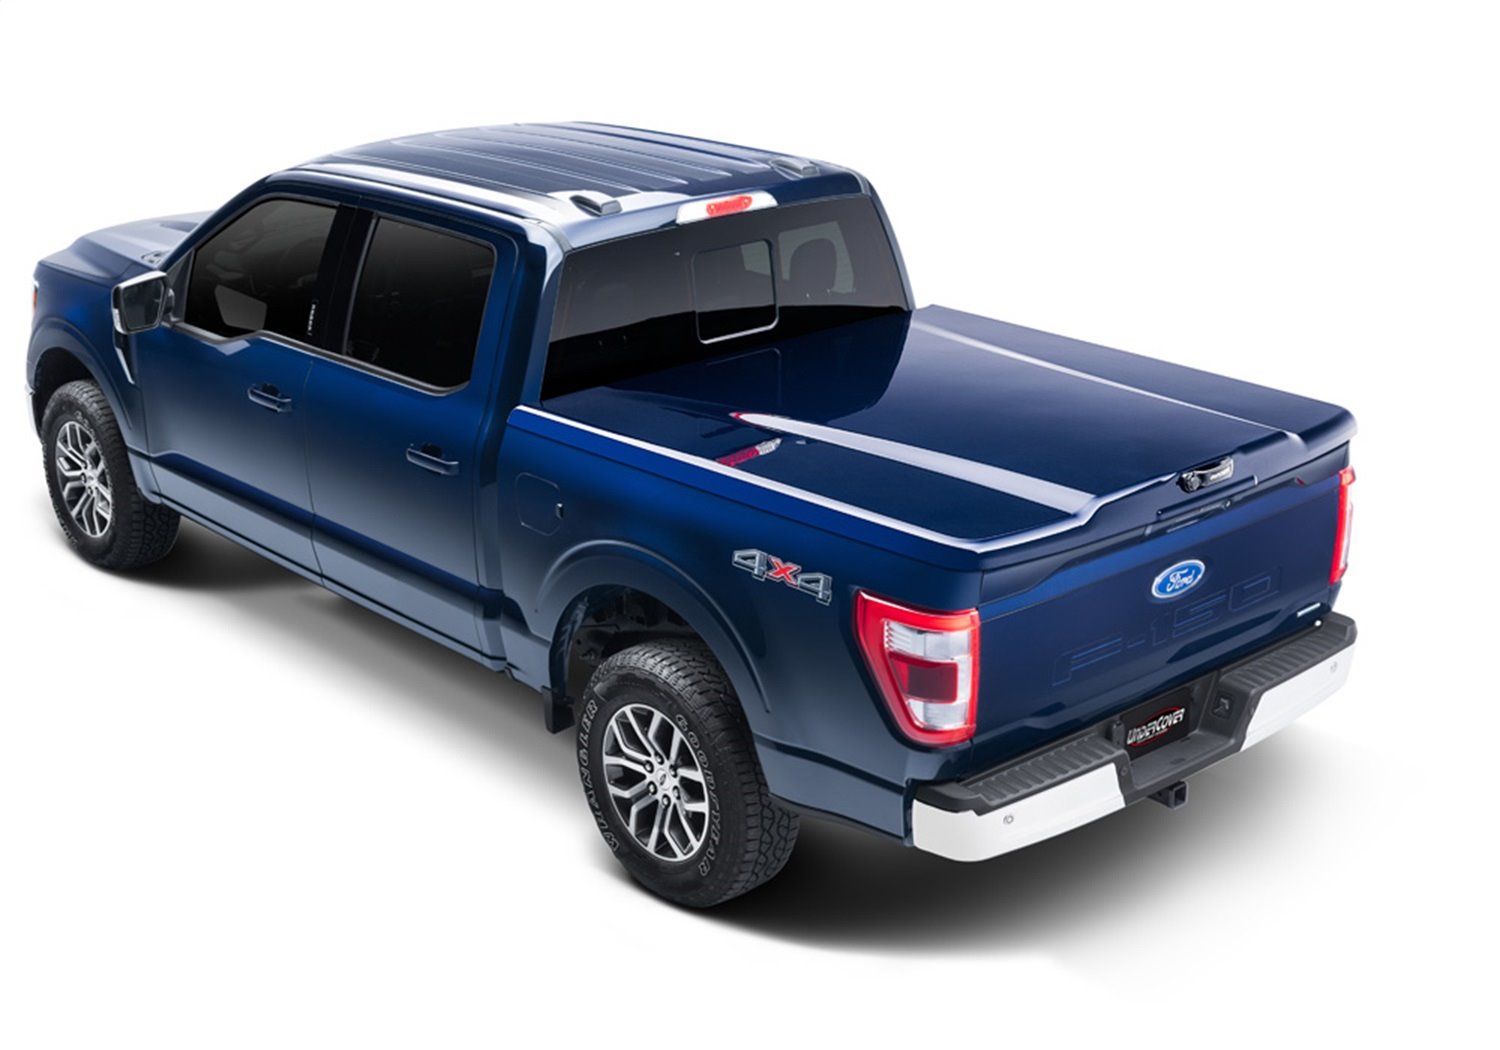 UC2218L-M7 Elite LX Hard Non-Folding Cover, Fits Select Ford F-150 6'7" Bed Crew, M7 Carbonized Gray